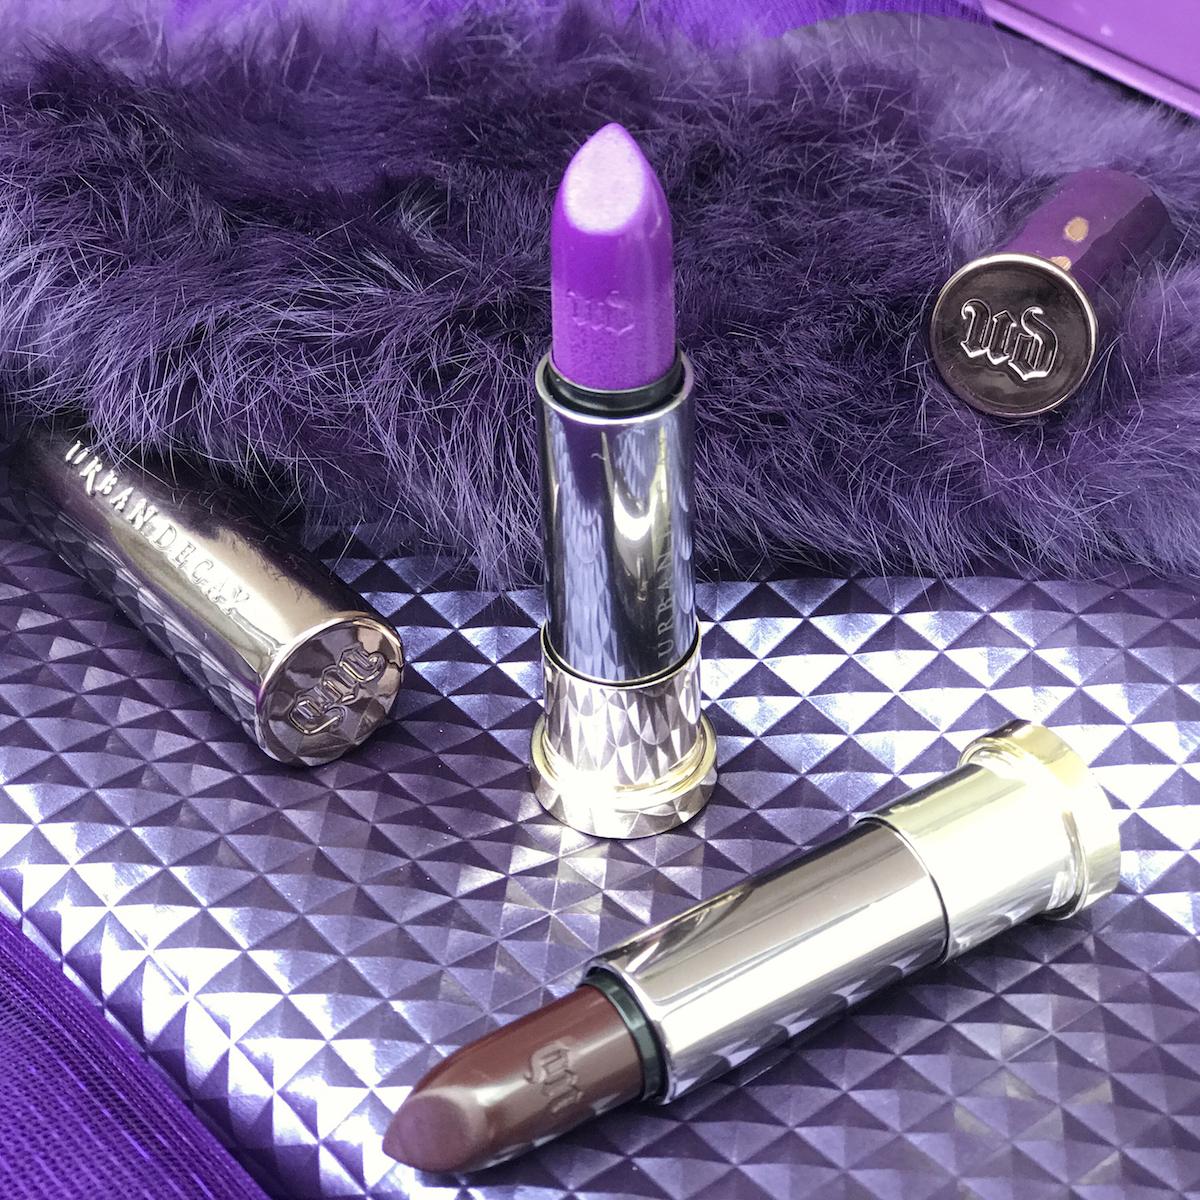 Urban Decay is comming to Slovenia - Beautyfull Blog